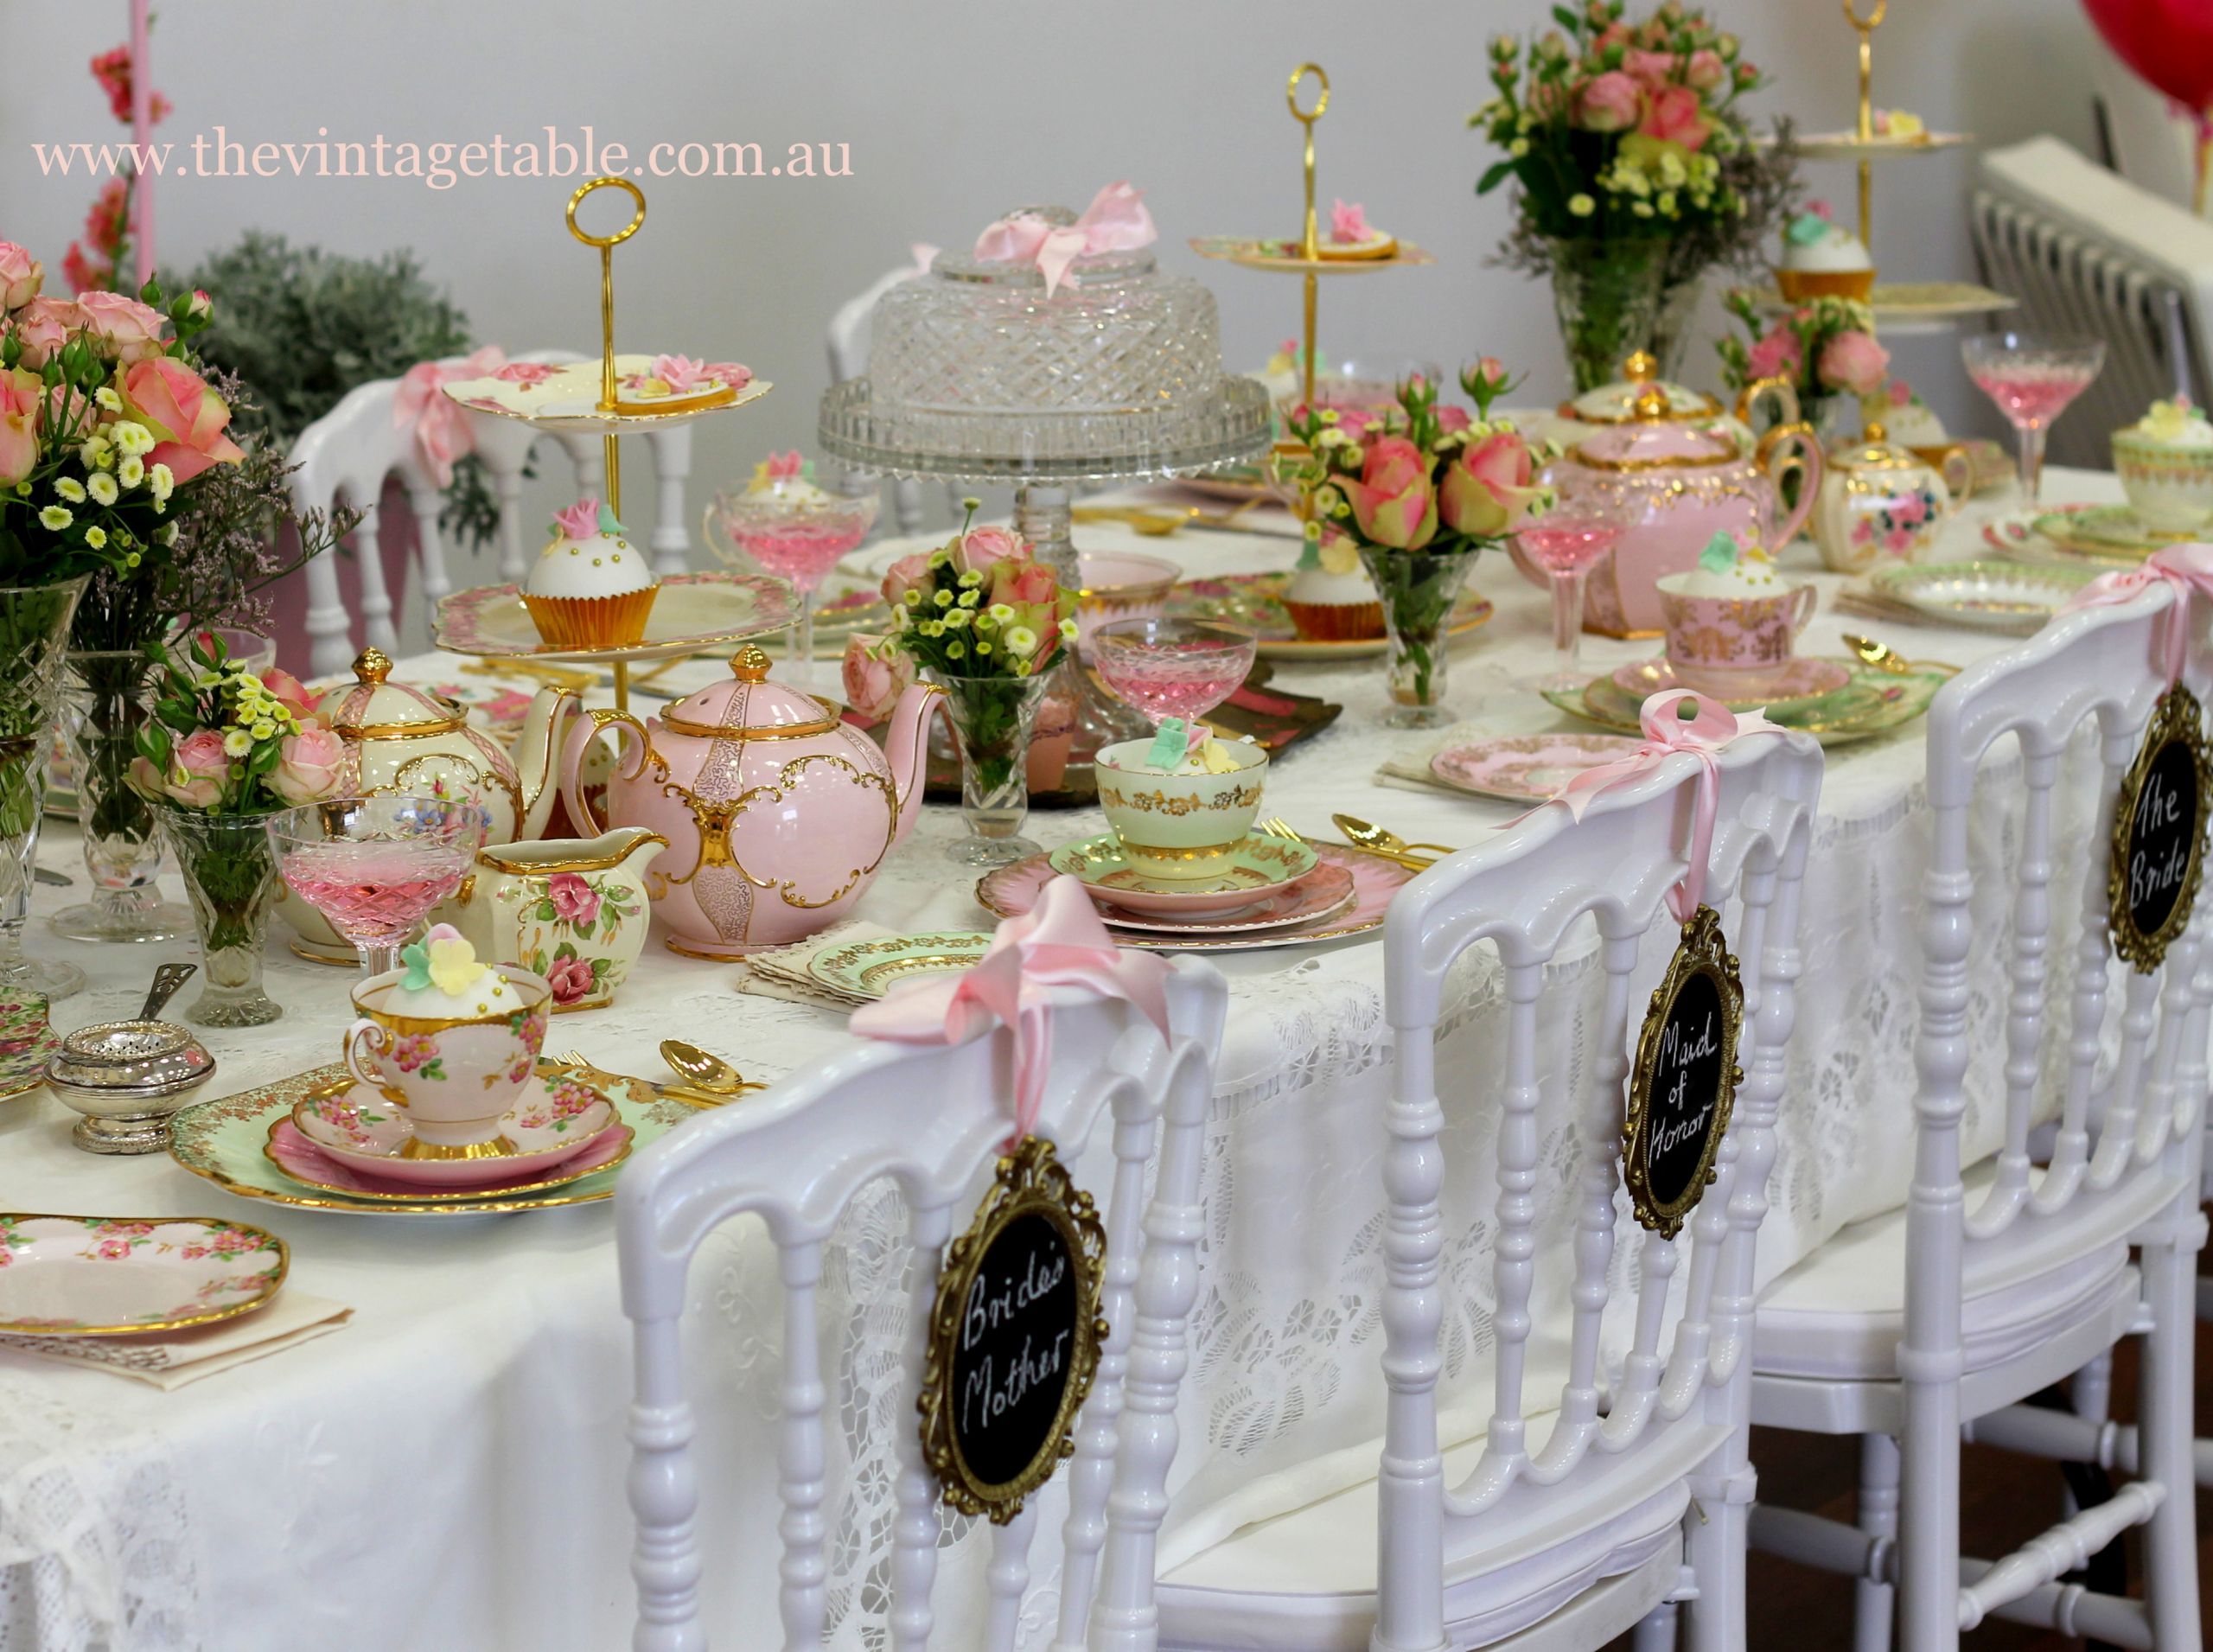 Tea Party Table Setting Ideas
 The Vintage Table Vintage China Hire